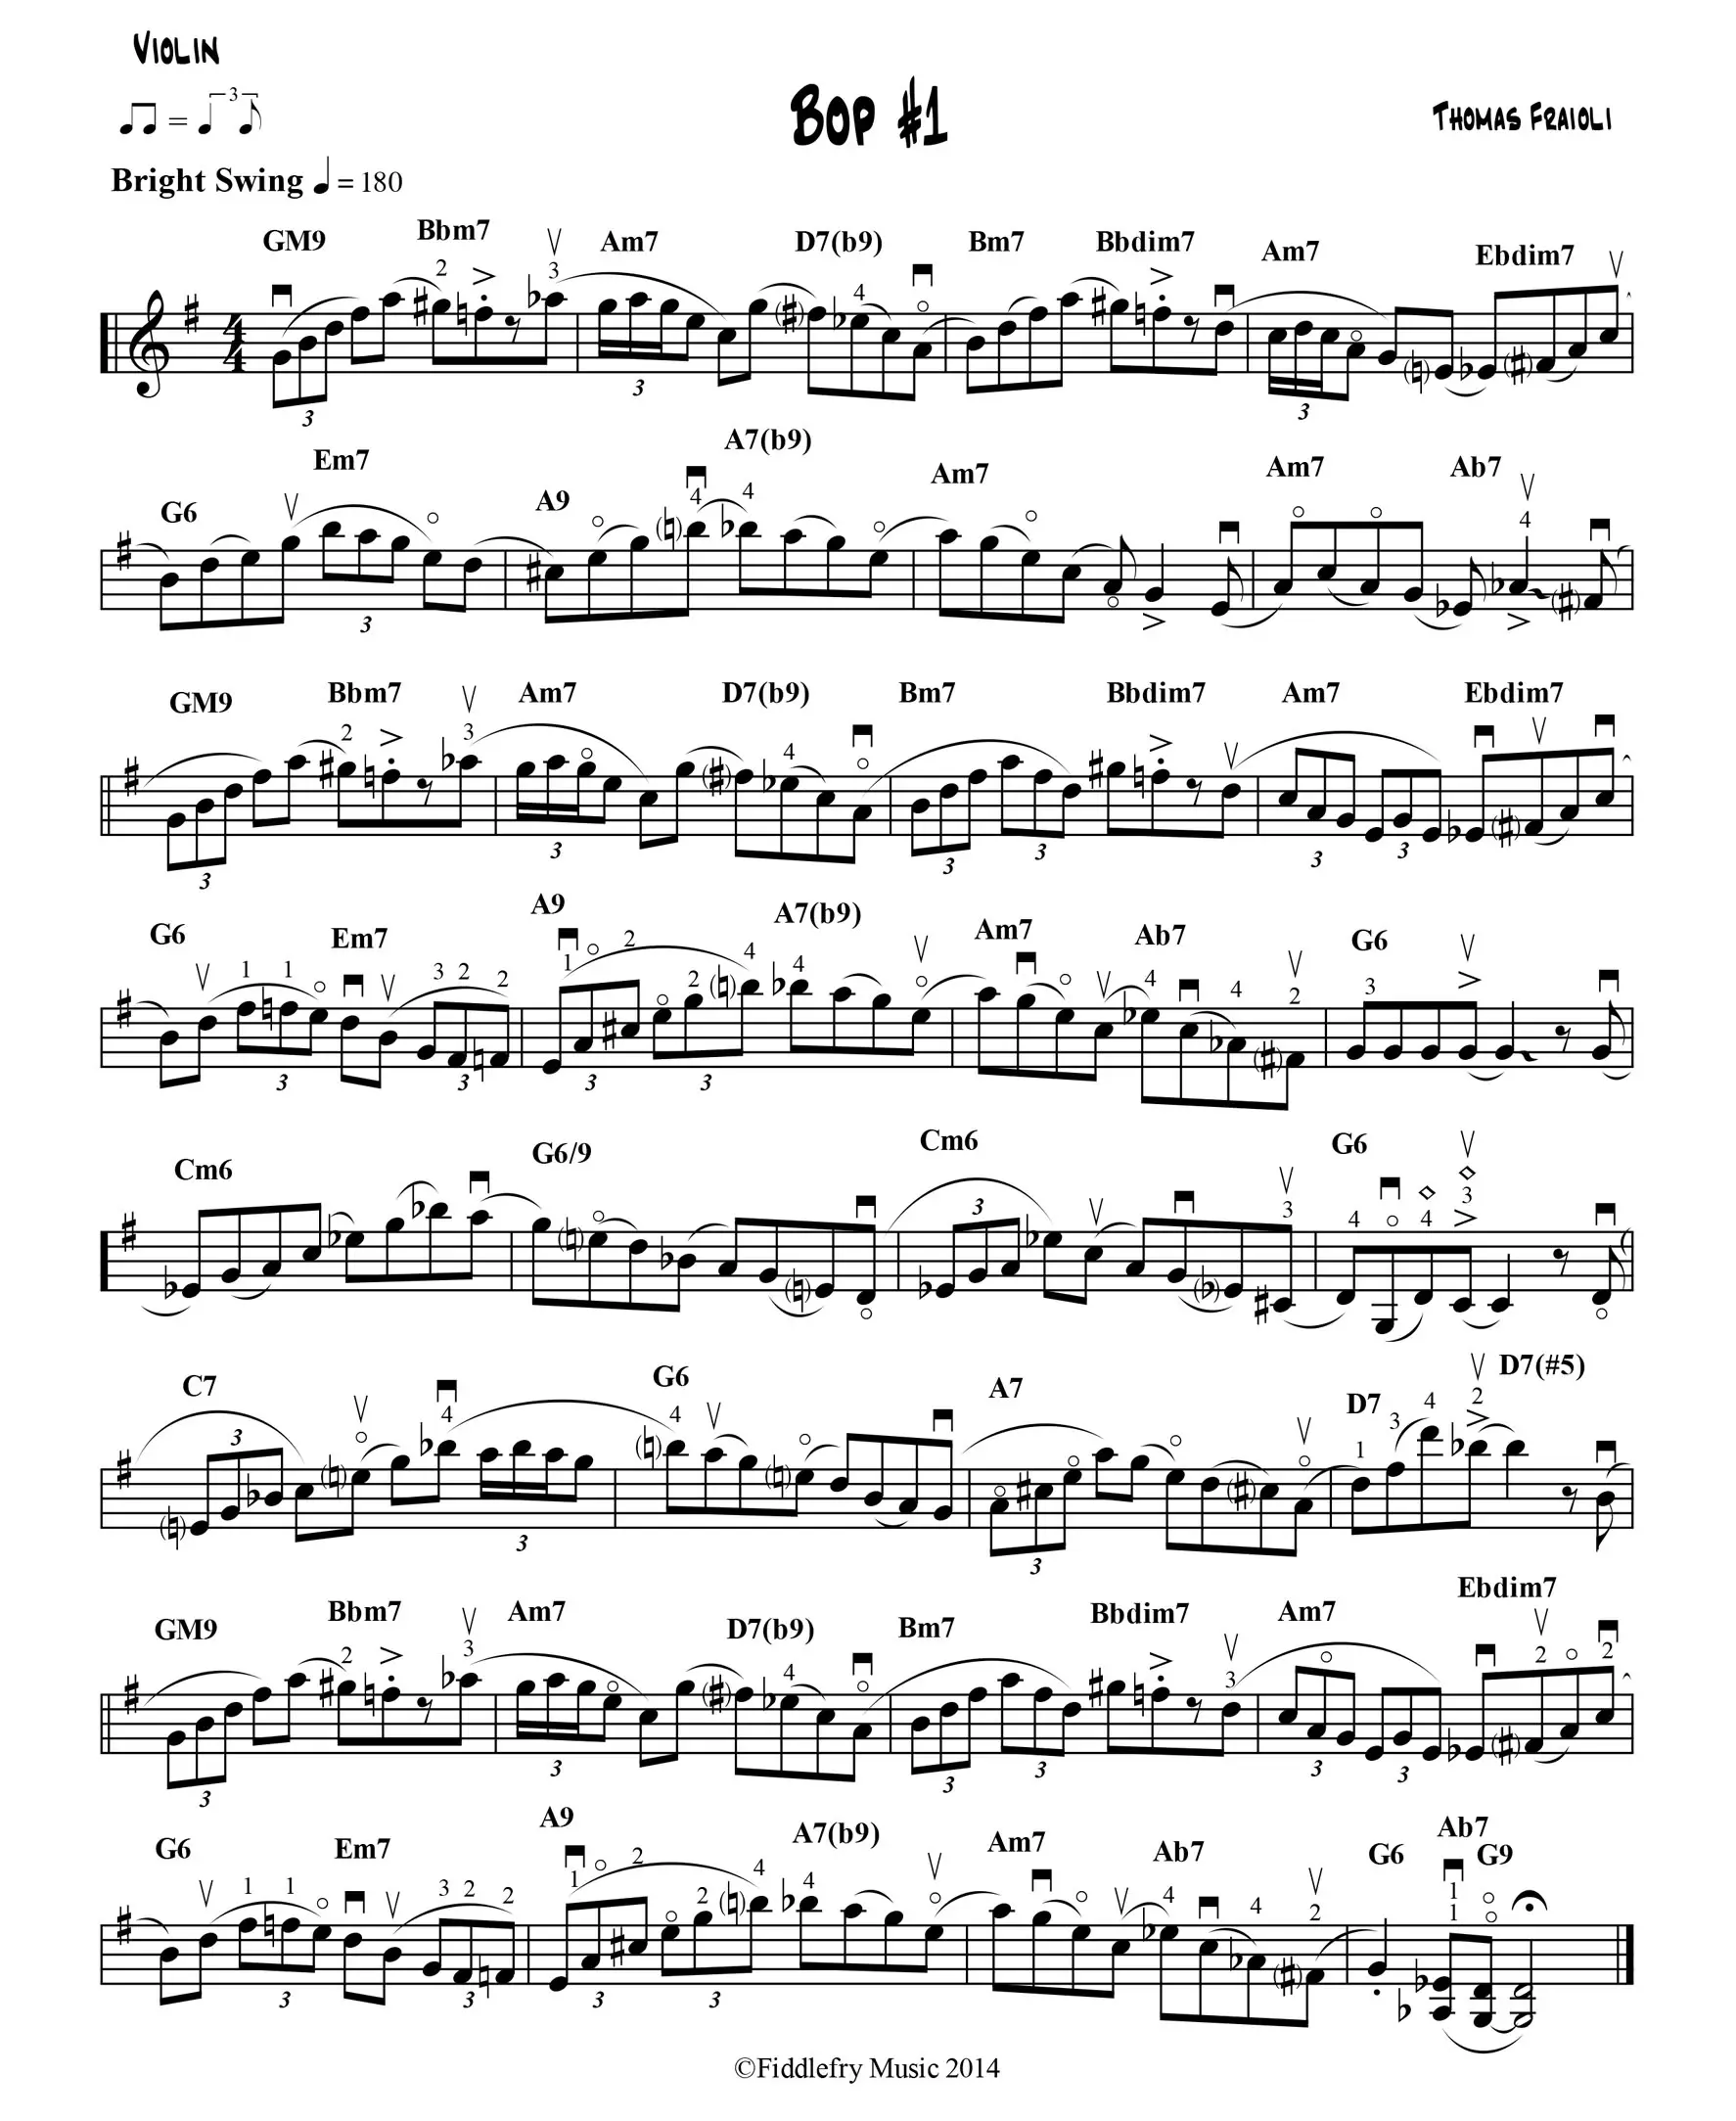 violin studies - How hard are the Rode Caprices